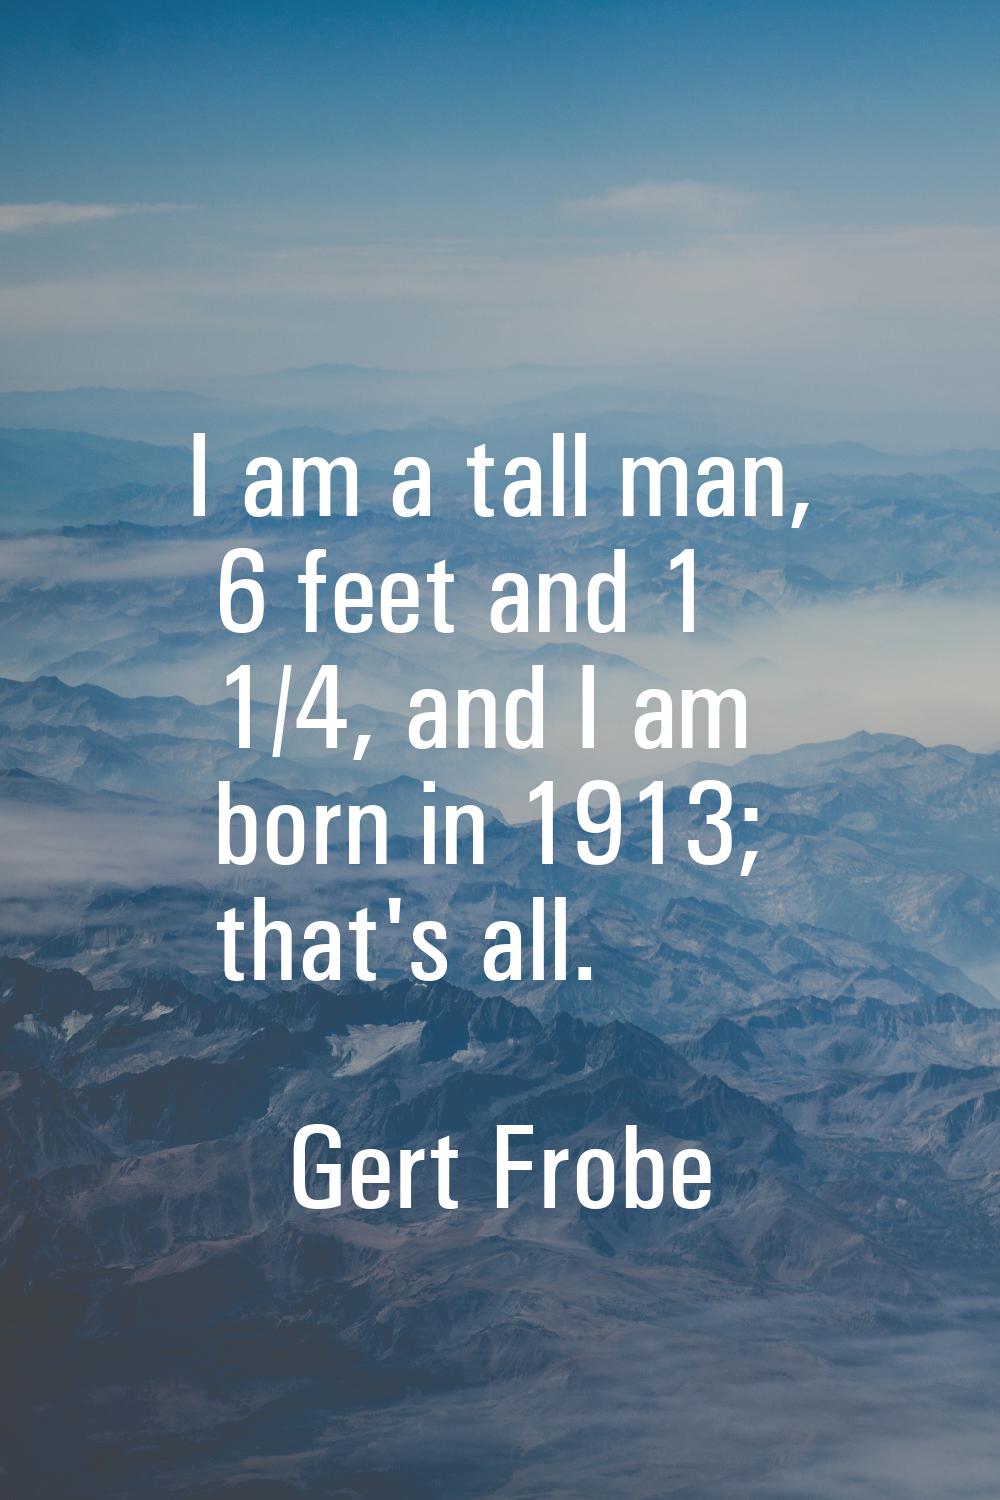 I am a tall man, 6 feet and 1 1/4, and I am born in 1913; that's all.